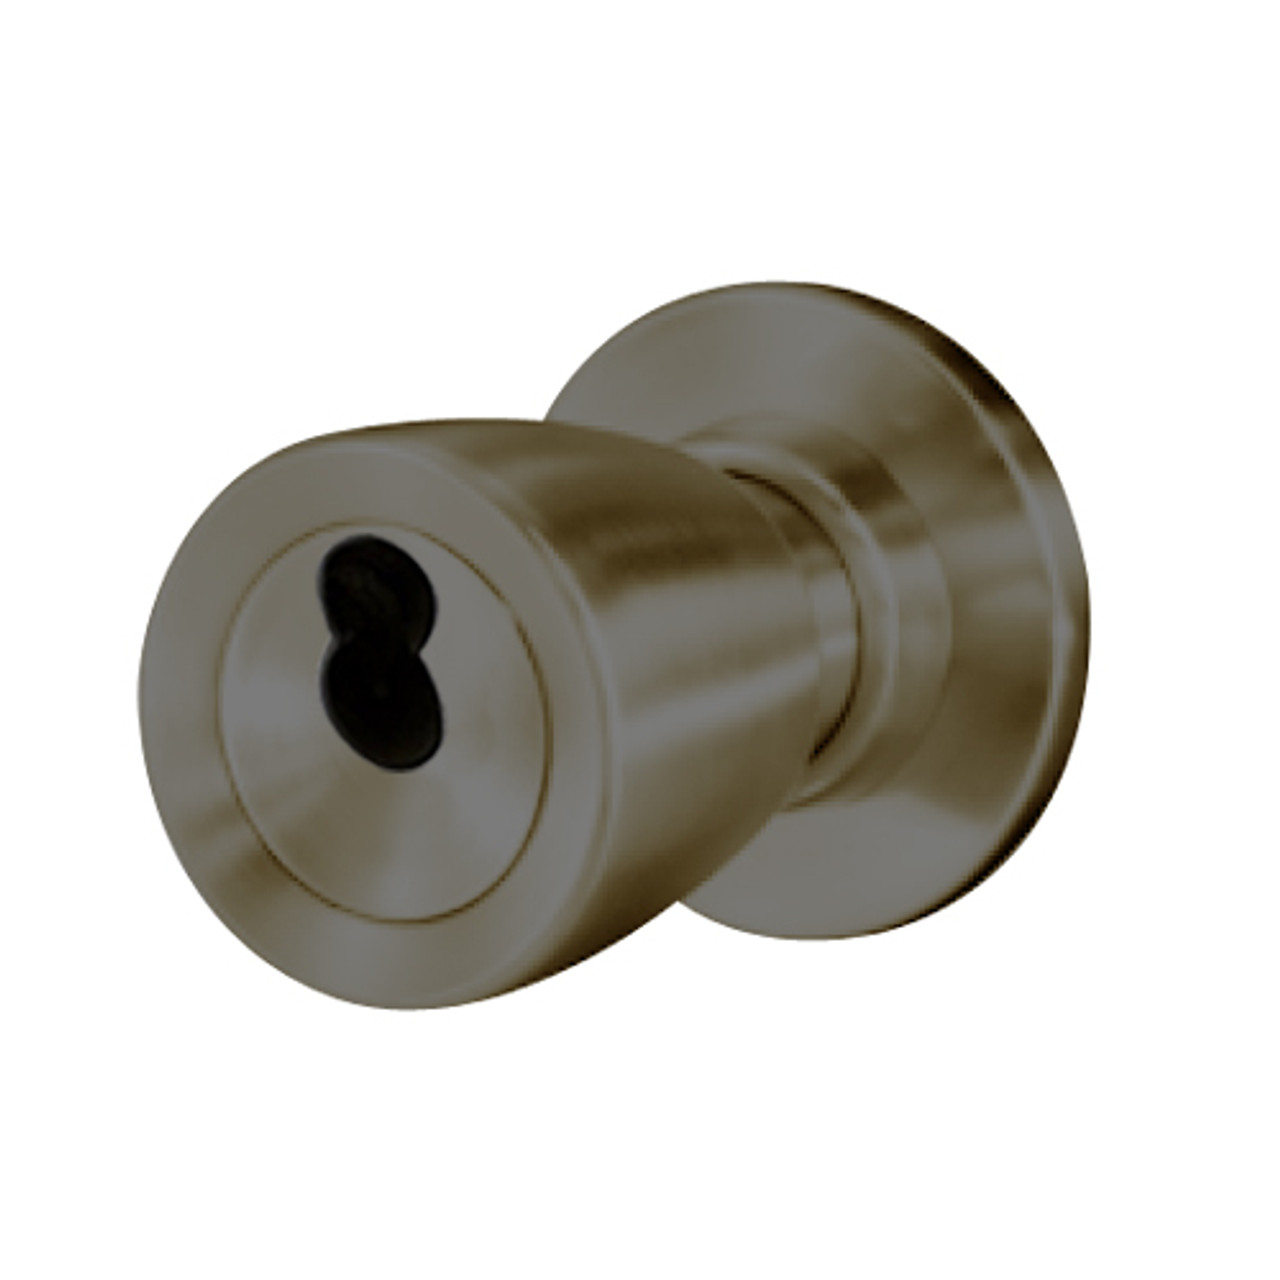 8K37S6CS3613 Best 8K Series Communicating Heavy Duty Cylindrical Knob Locks with Tulip Style in Oil Rubbed Bronze